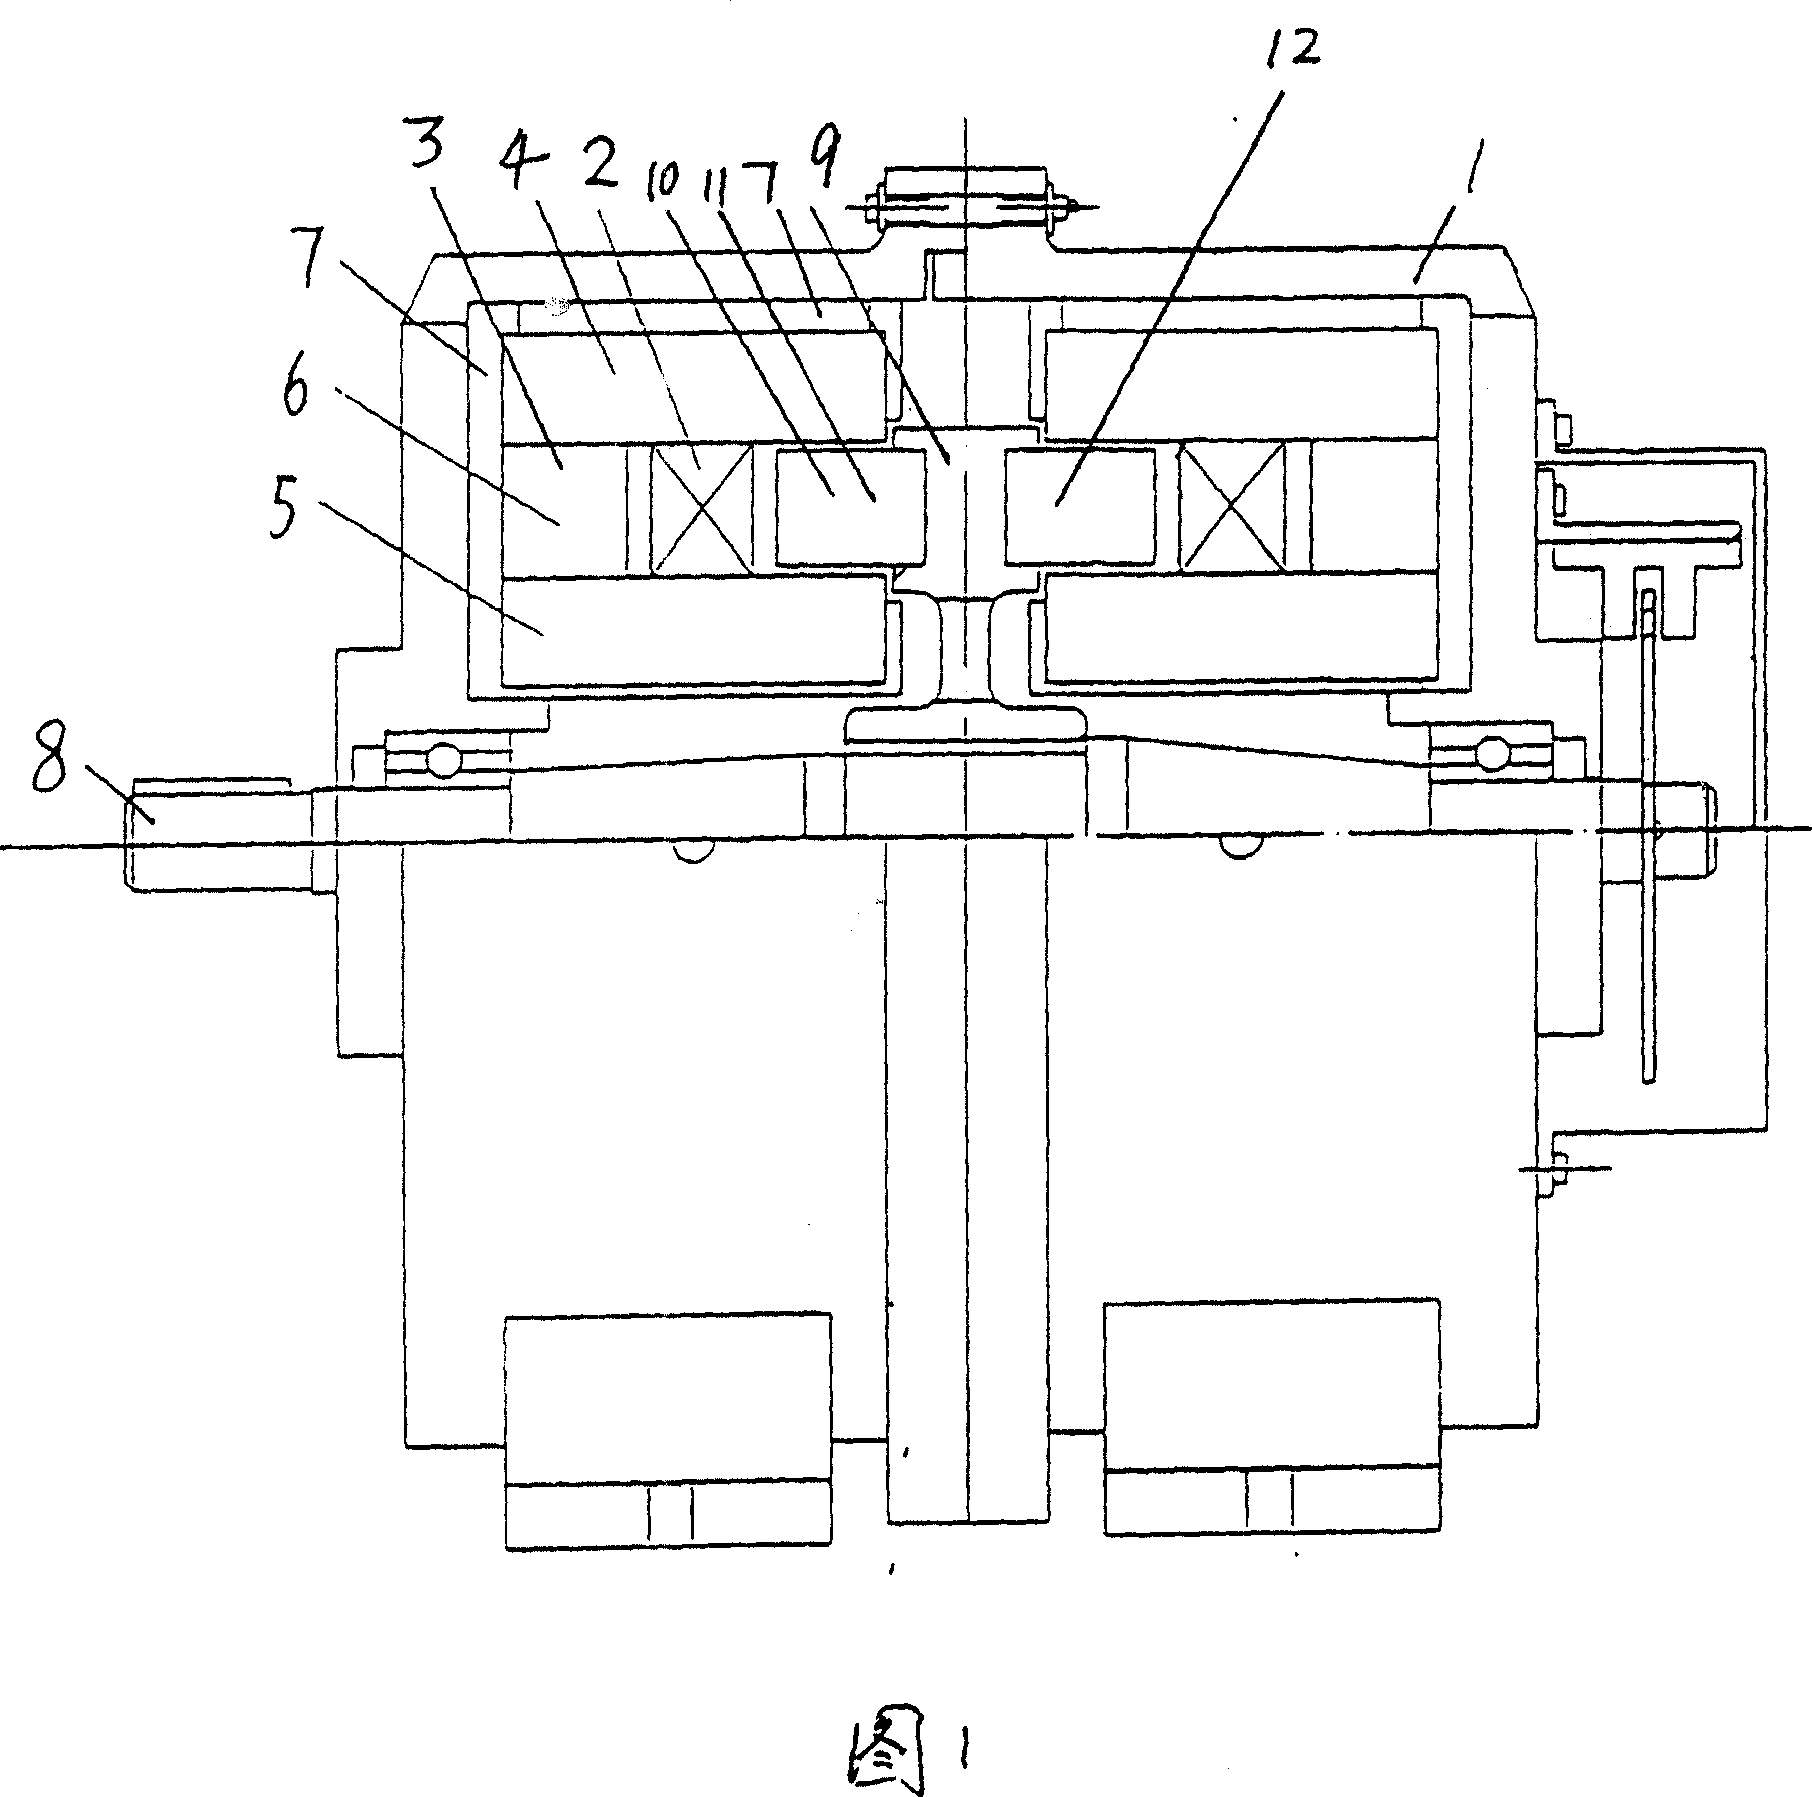 Two-phase twenty-pole radial stator and rotor combined magnetic field electric motor